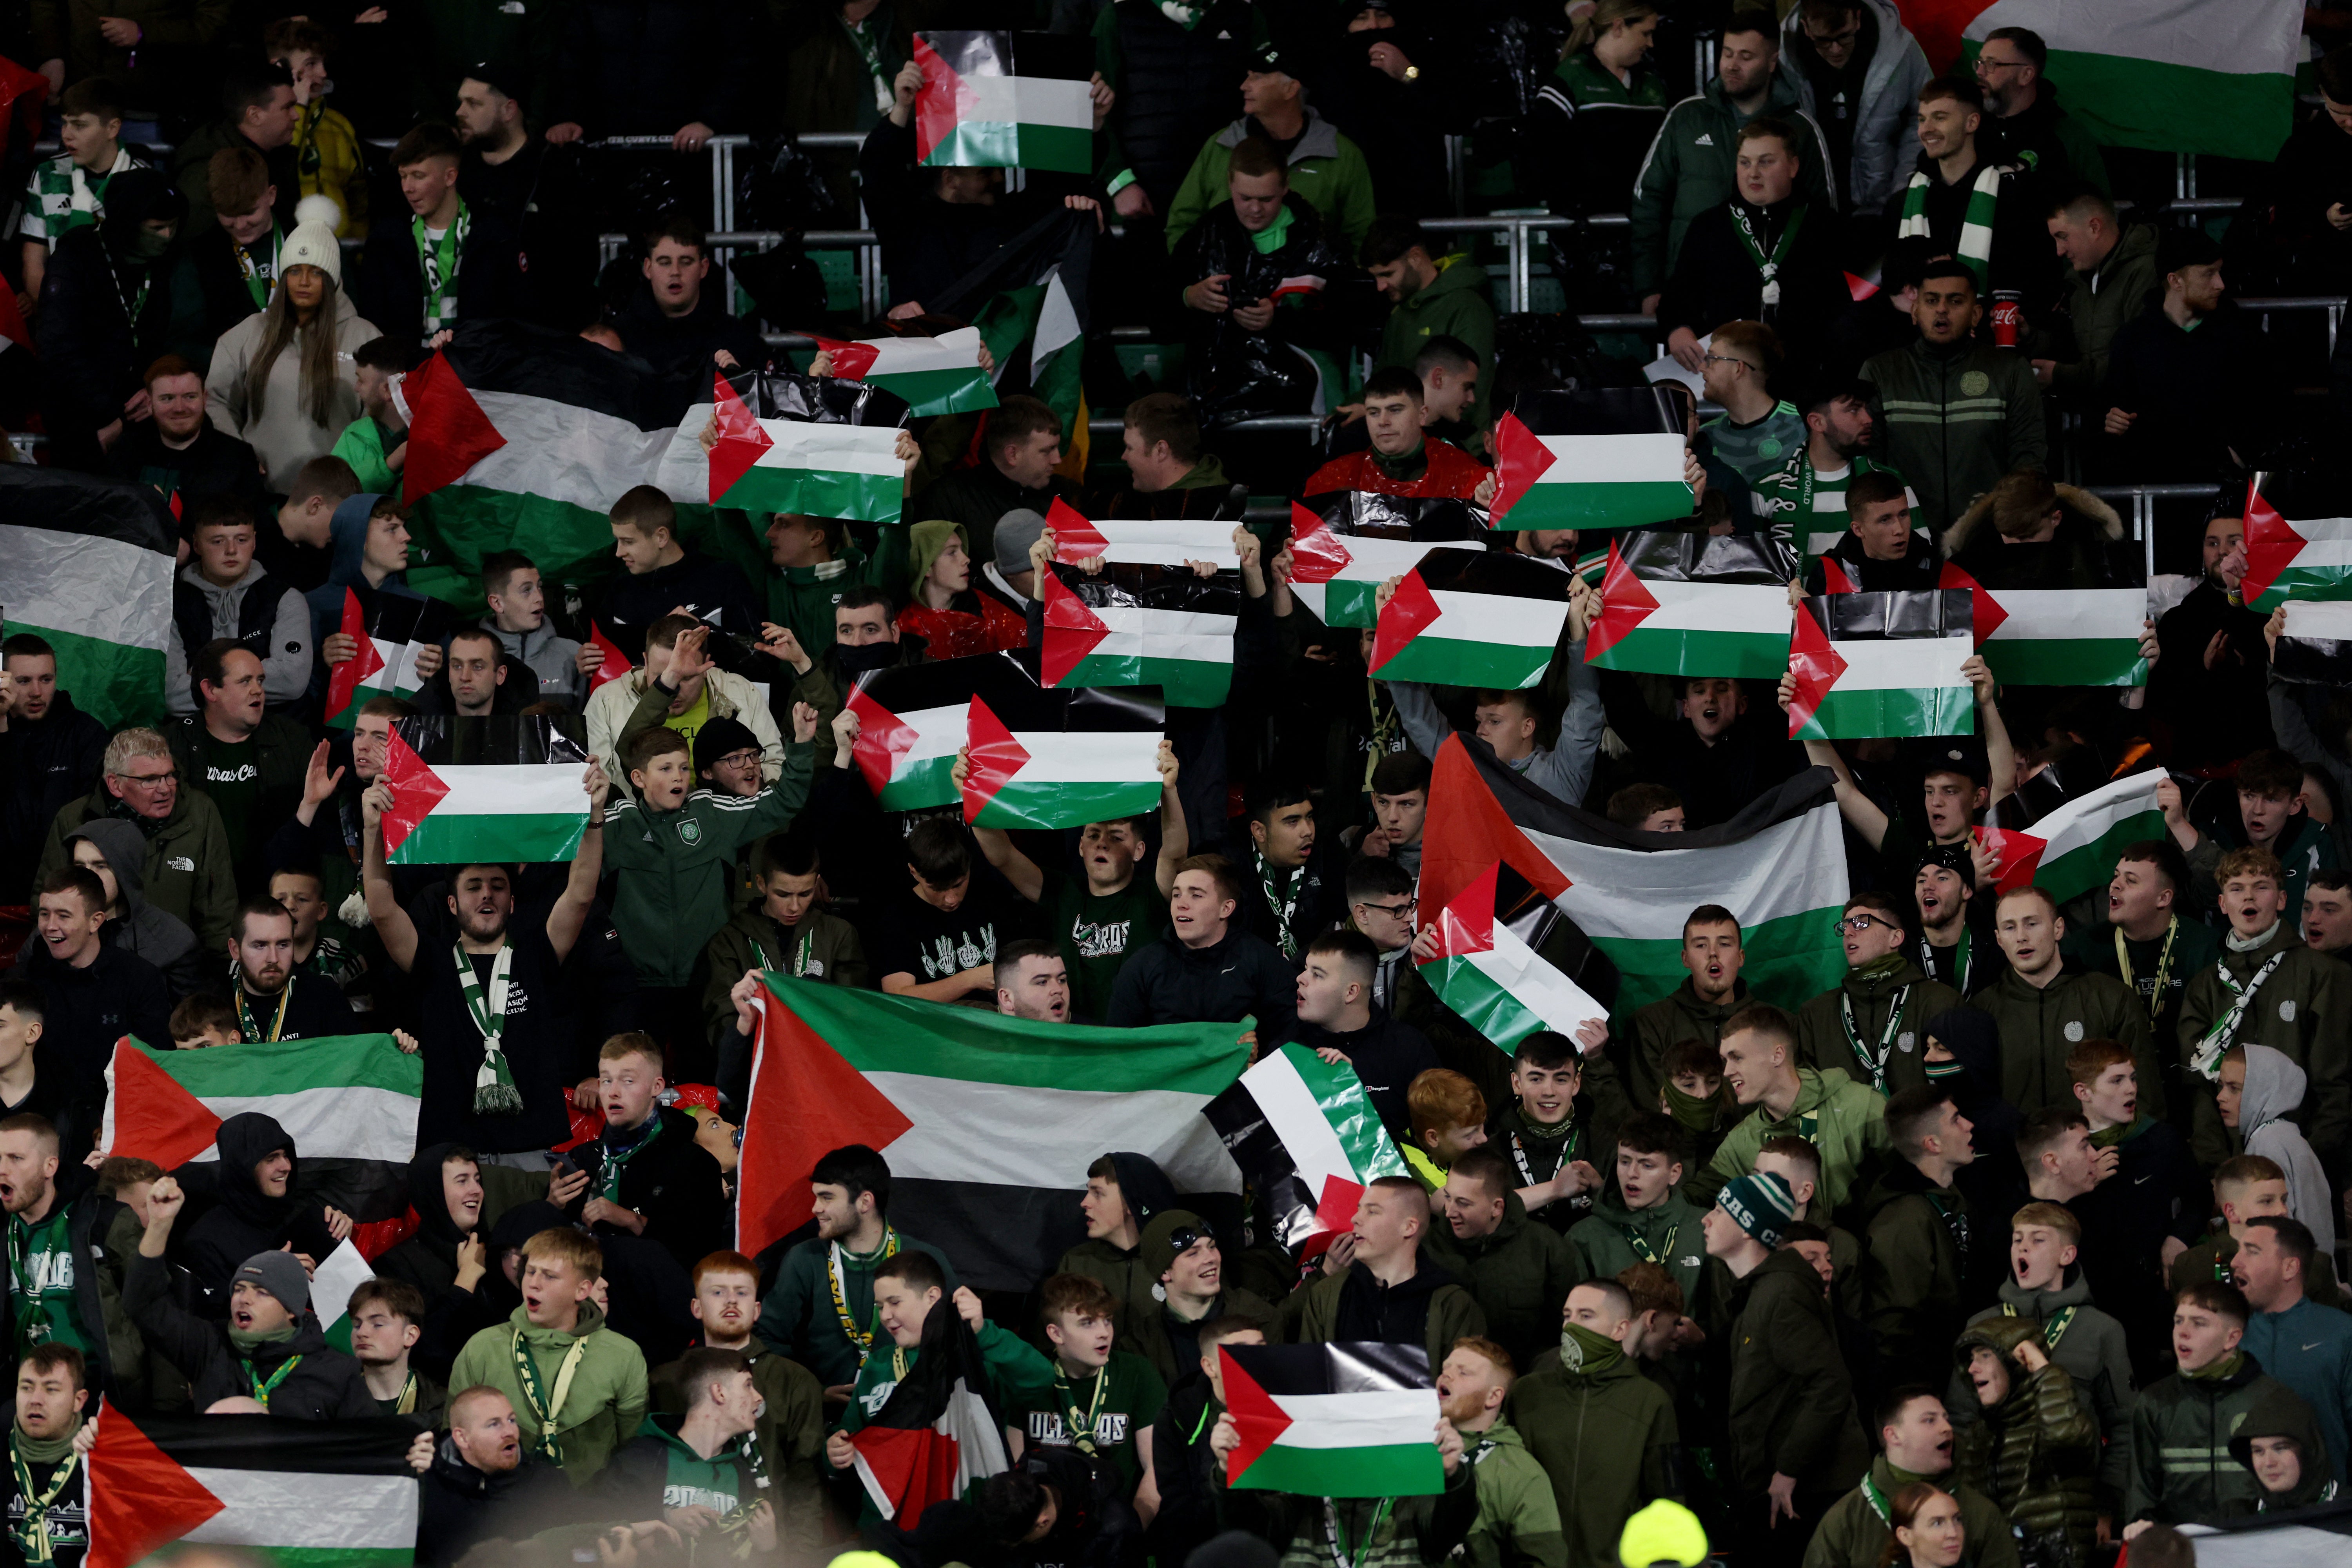 Celtic fans displayed Palestine flags ahead of the Champions League match against Atletico Madrid